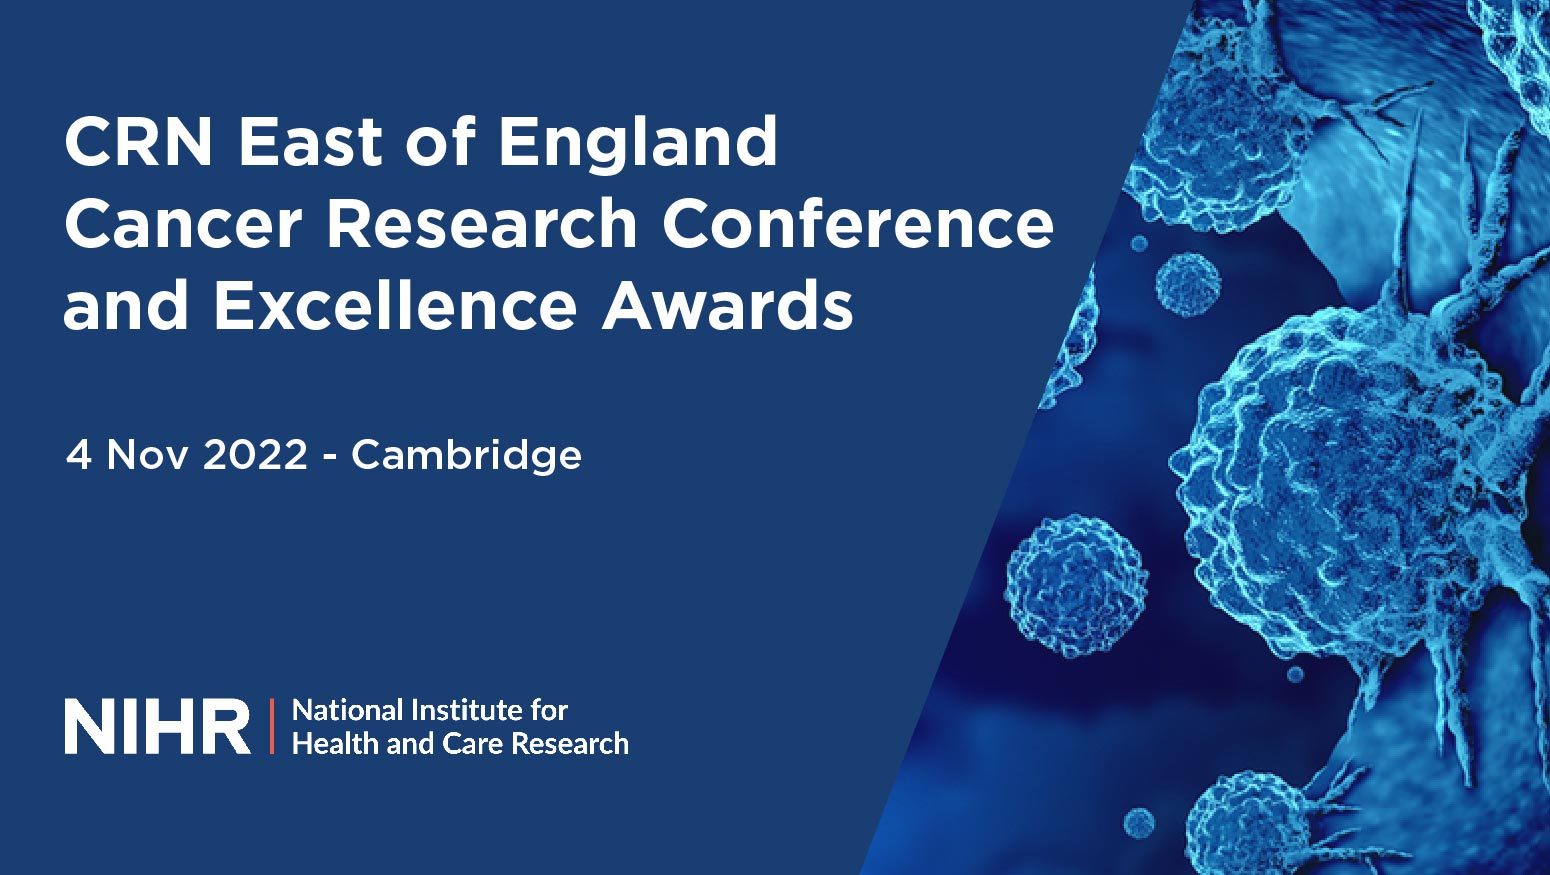 NIHR CRN East of England Cancer Research Conference